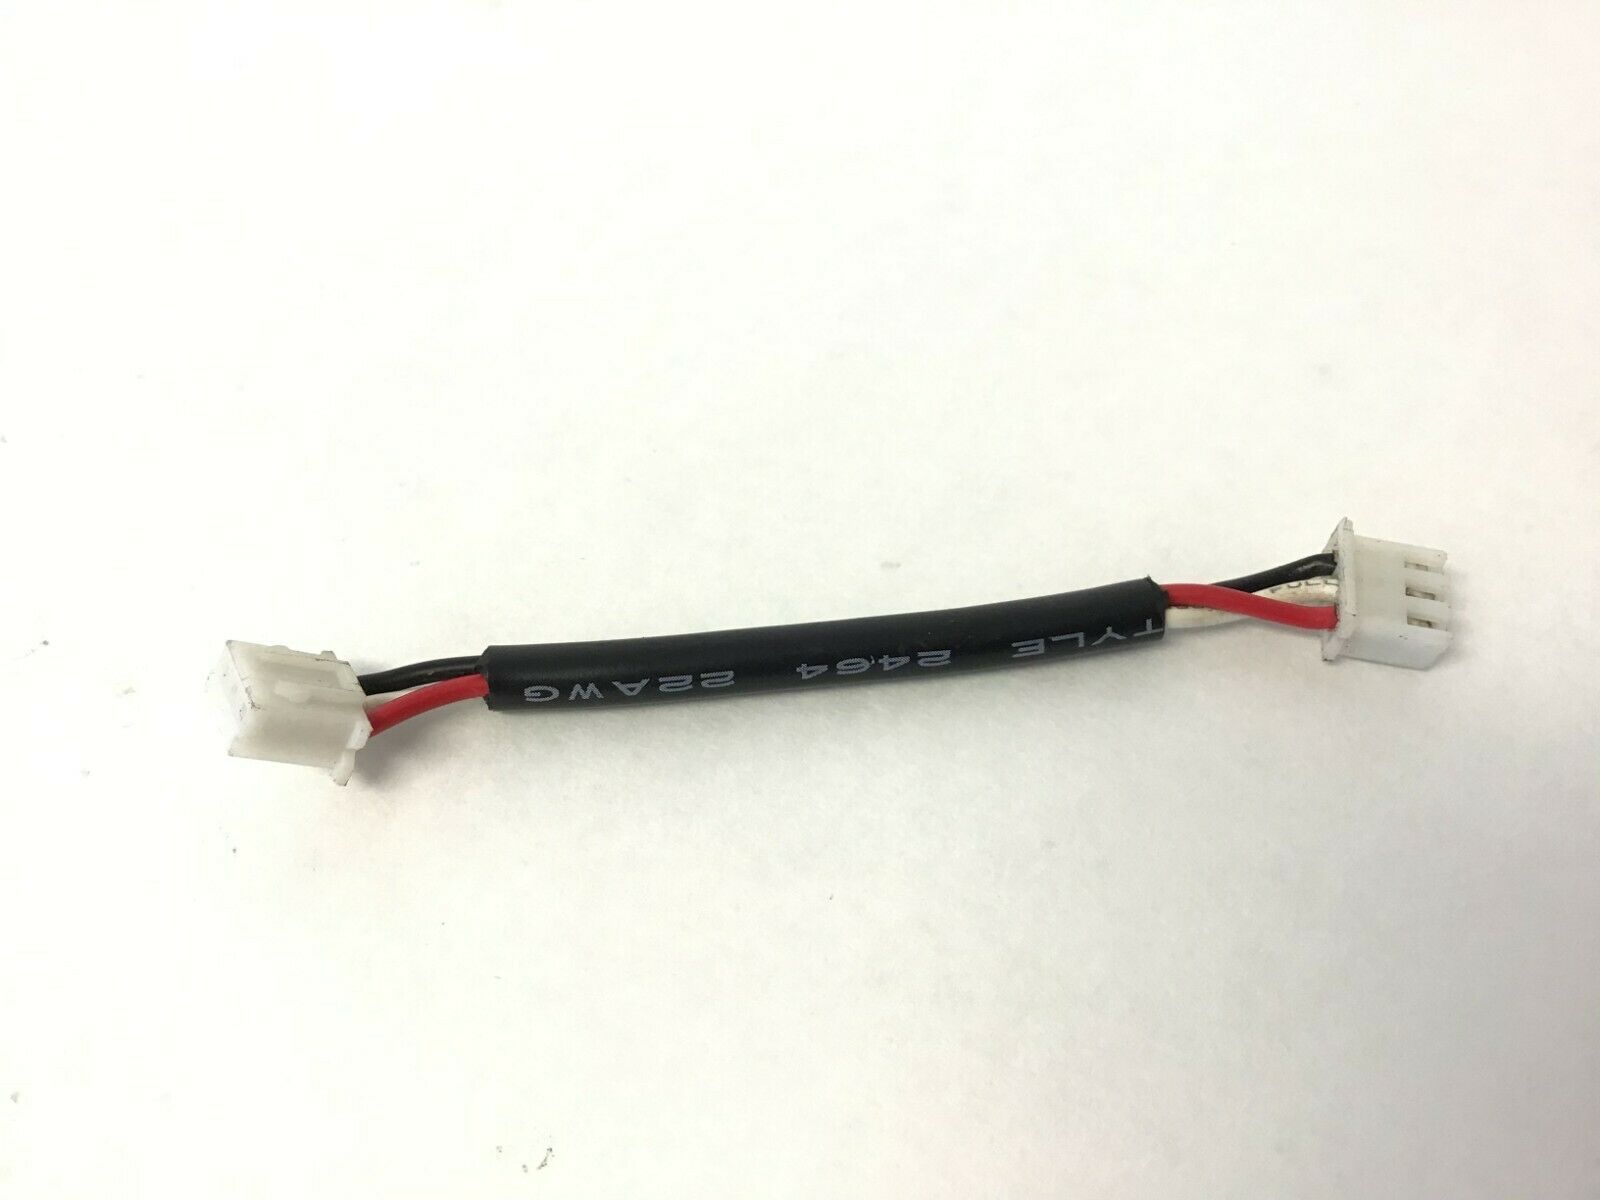 Nautilus T714 Treadmill Incline Extension Wire Harness 22A 2464 (Used)